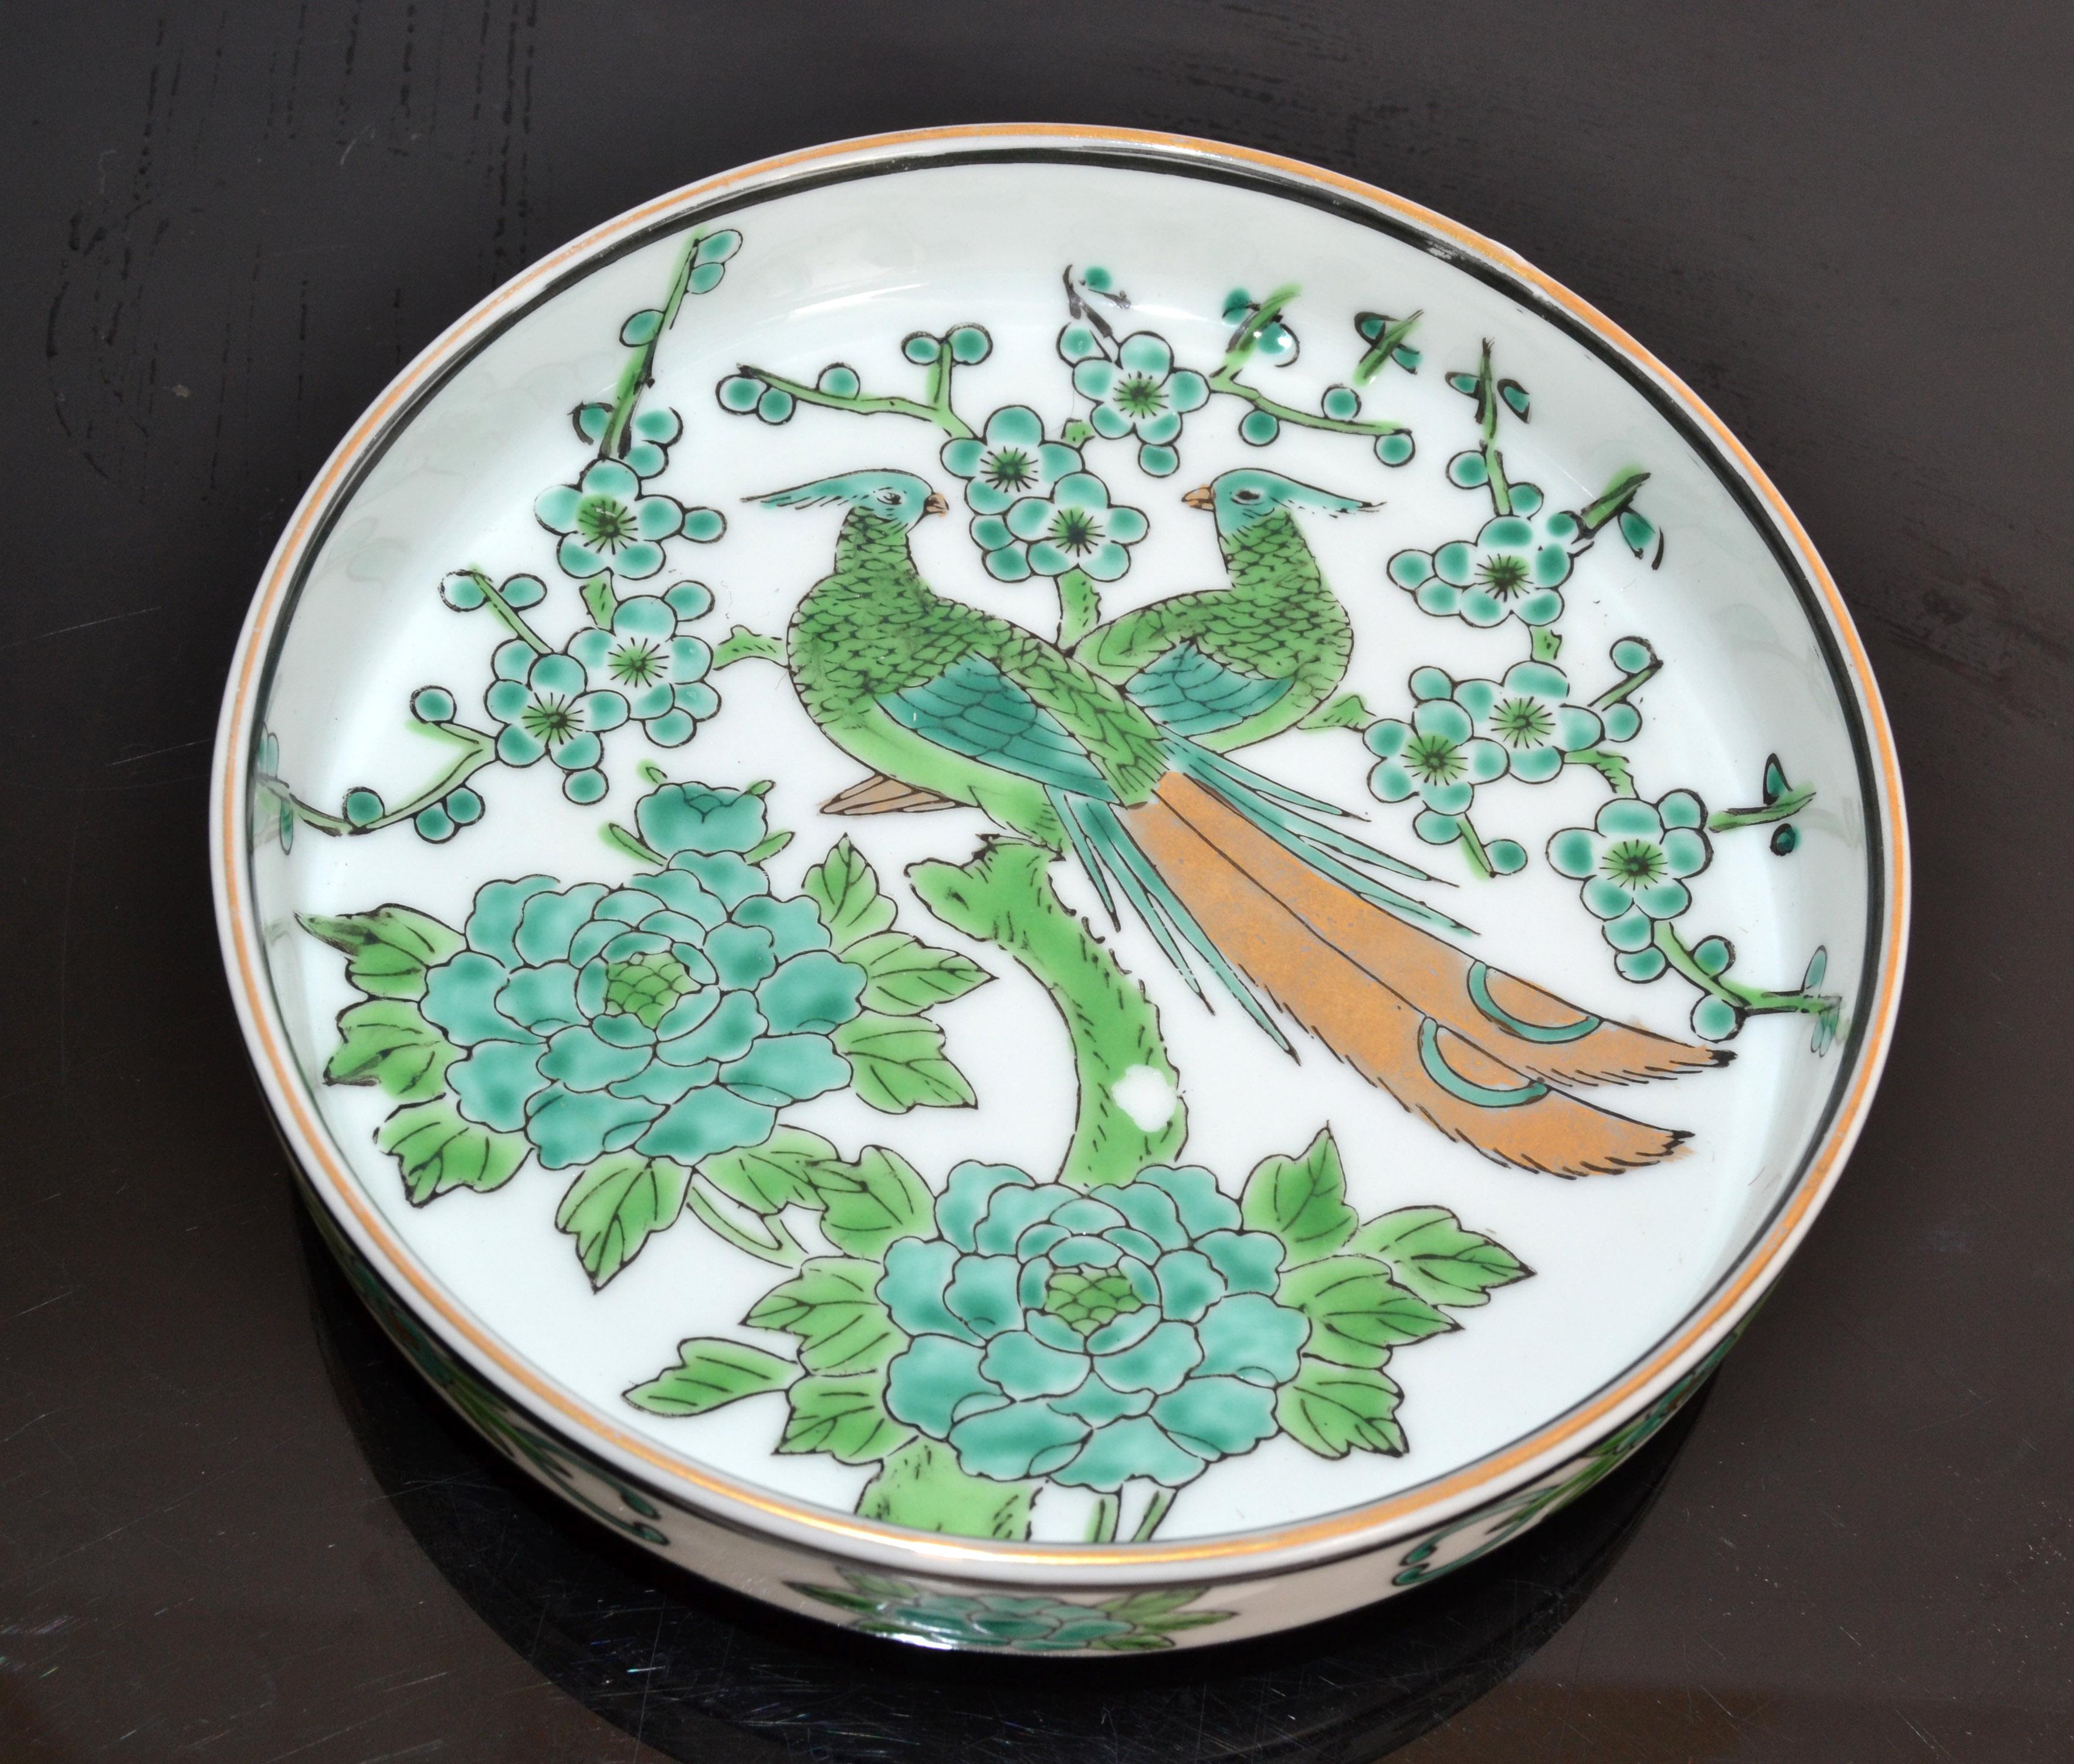 This is a beautiful circa 1960 Mid-Century Modern Gold Imari marked Porcelain hand-painted green, gold leaf and white bowl, vide poche, plate or dish.
The piece has a gorgeous peacock motif with gold leaf accents. 
Marked Gold Imari on bottom